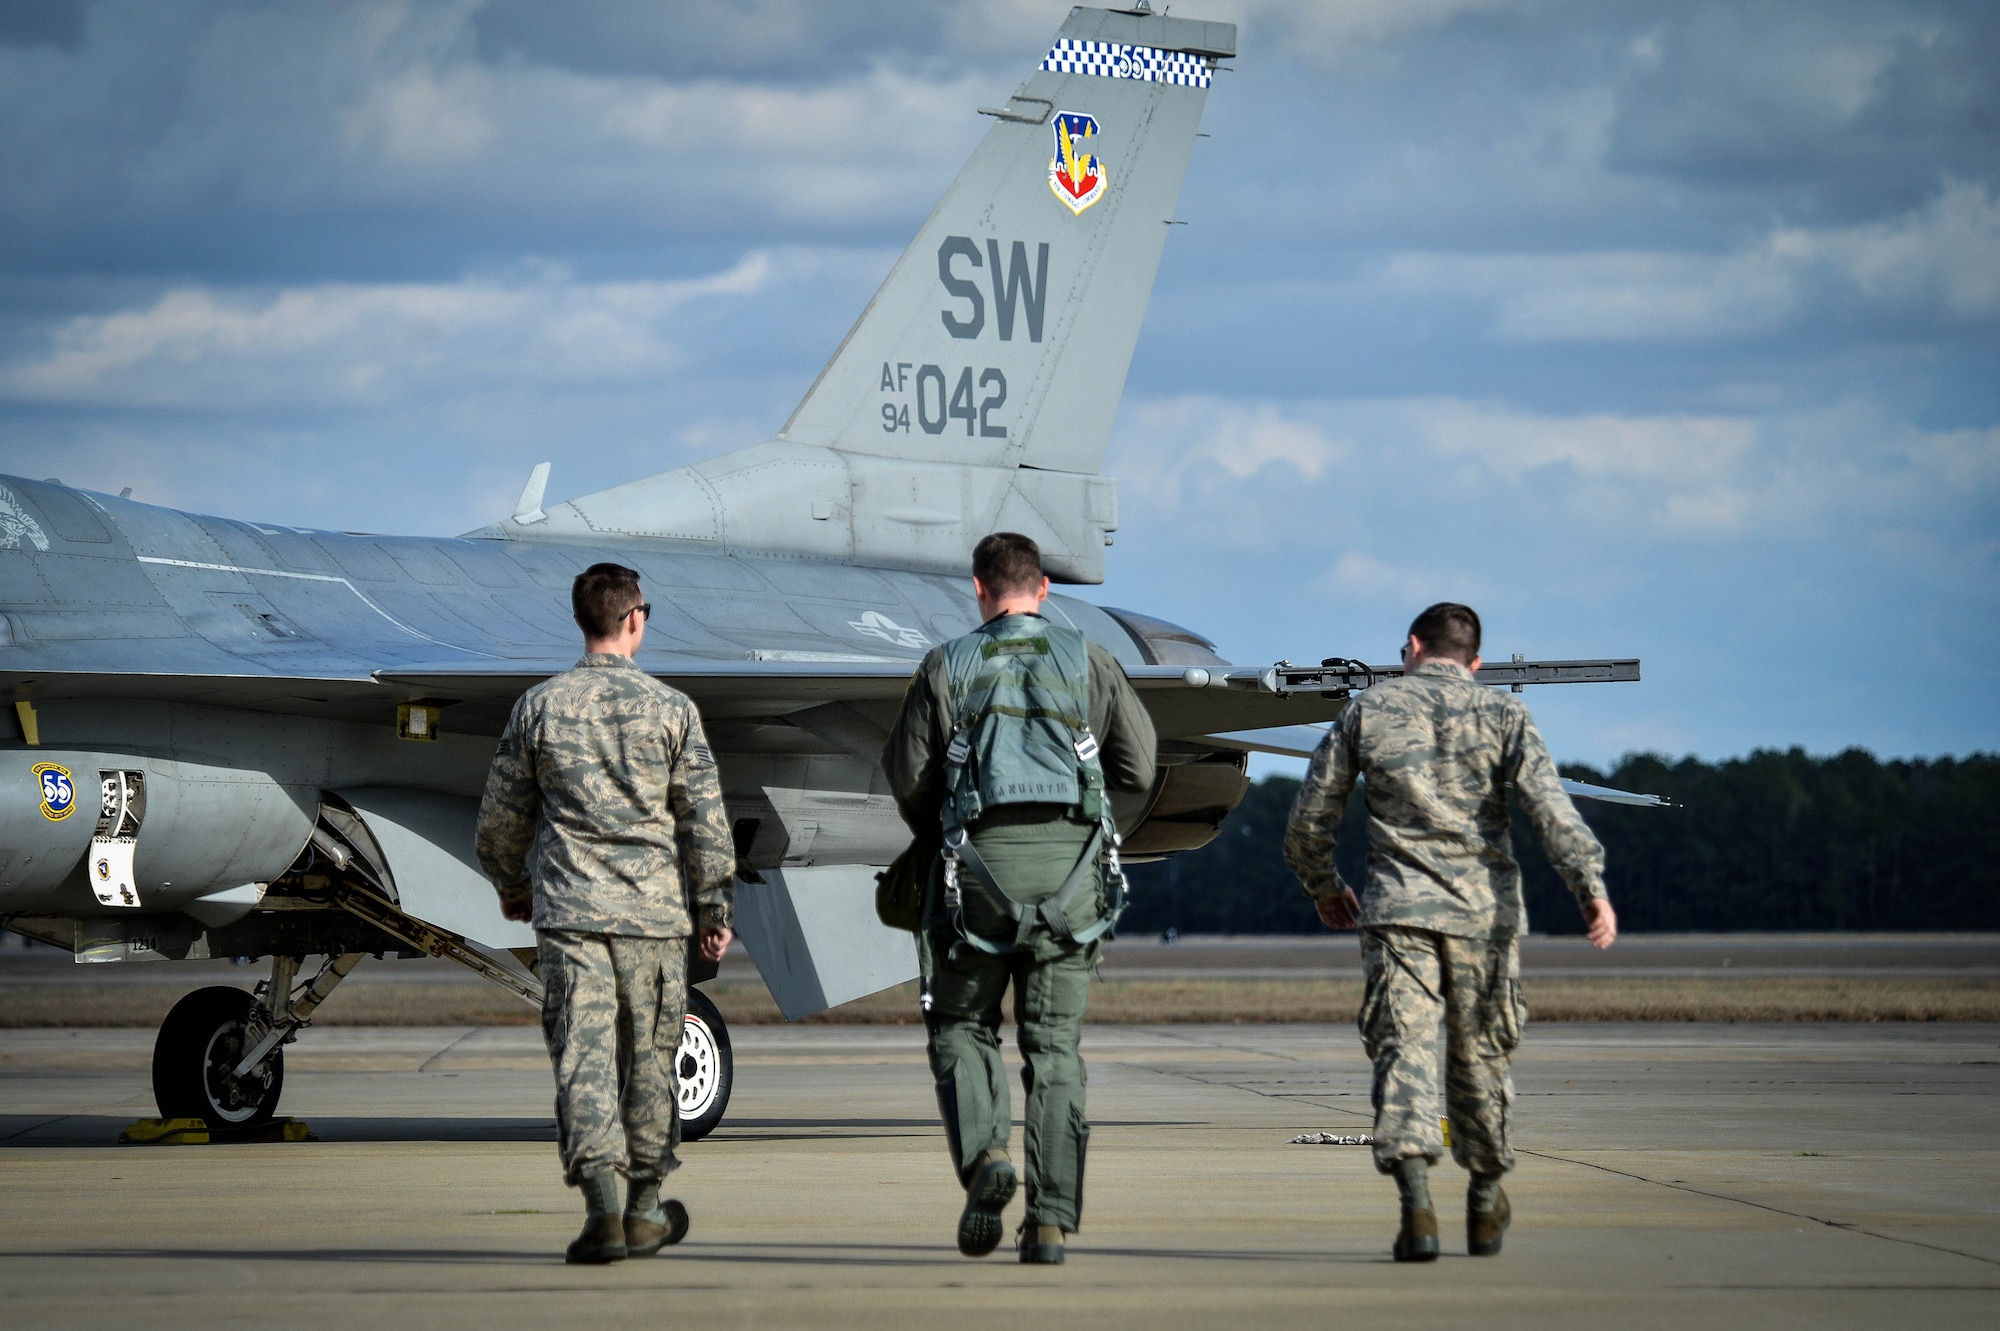 (From left) Staff Sgt. Dominic Dizes, F-16 Viper Demonstration Team dedicated crew chief, Capt. John Waters, F-16 Viper Demonstration Team pilot, and Senior Airman Adam Armstrong, F-16 Viper Demonstration Team dedicated crew chief, walk out to their aircraft for a 9th Air Force certification flight at Shaw Air Force Base, S.C., Jan. 20, 2017. The F-16CM Fighting Falcon is a fourth generation fighter aircraft that can withstand nine times the force of gravity, or nine G’s, which exceeds the capability of all other fourth generation fighter aircraft. (U.S. Air Force photo by Senior Airman Michael Cossaboom)